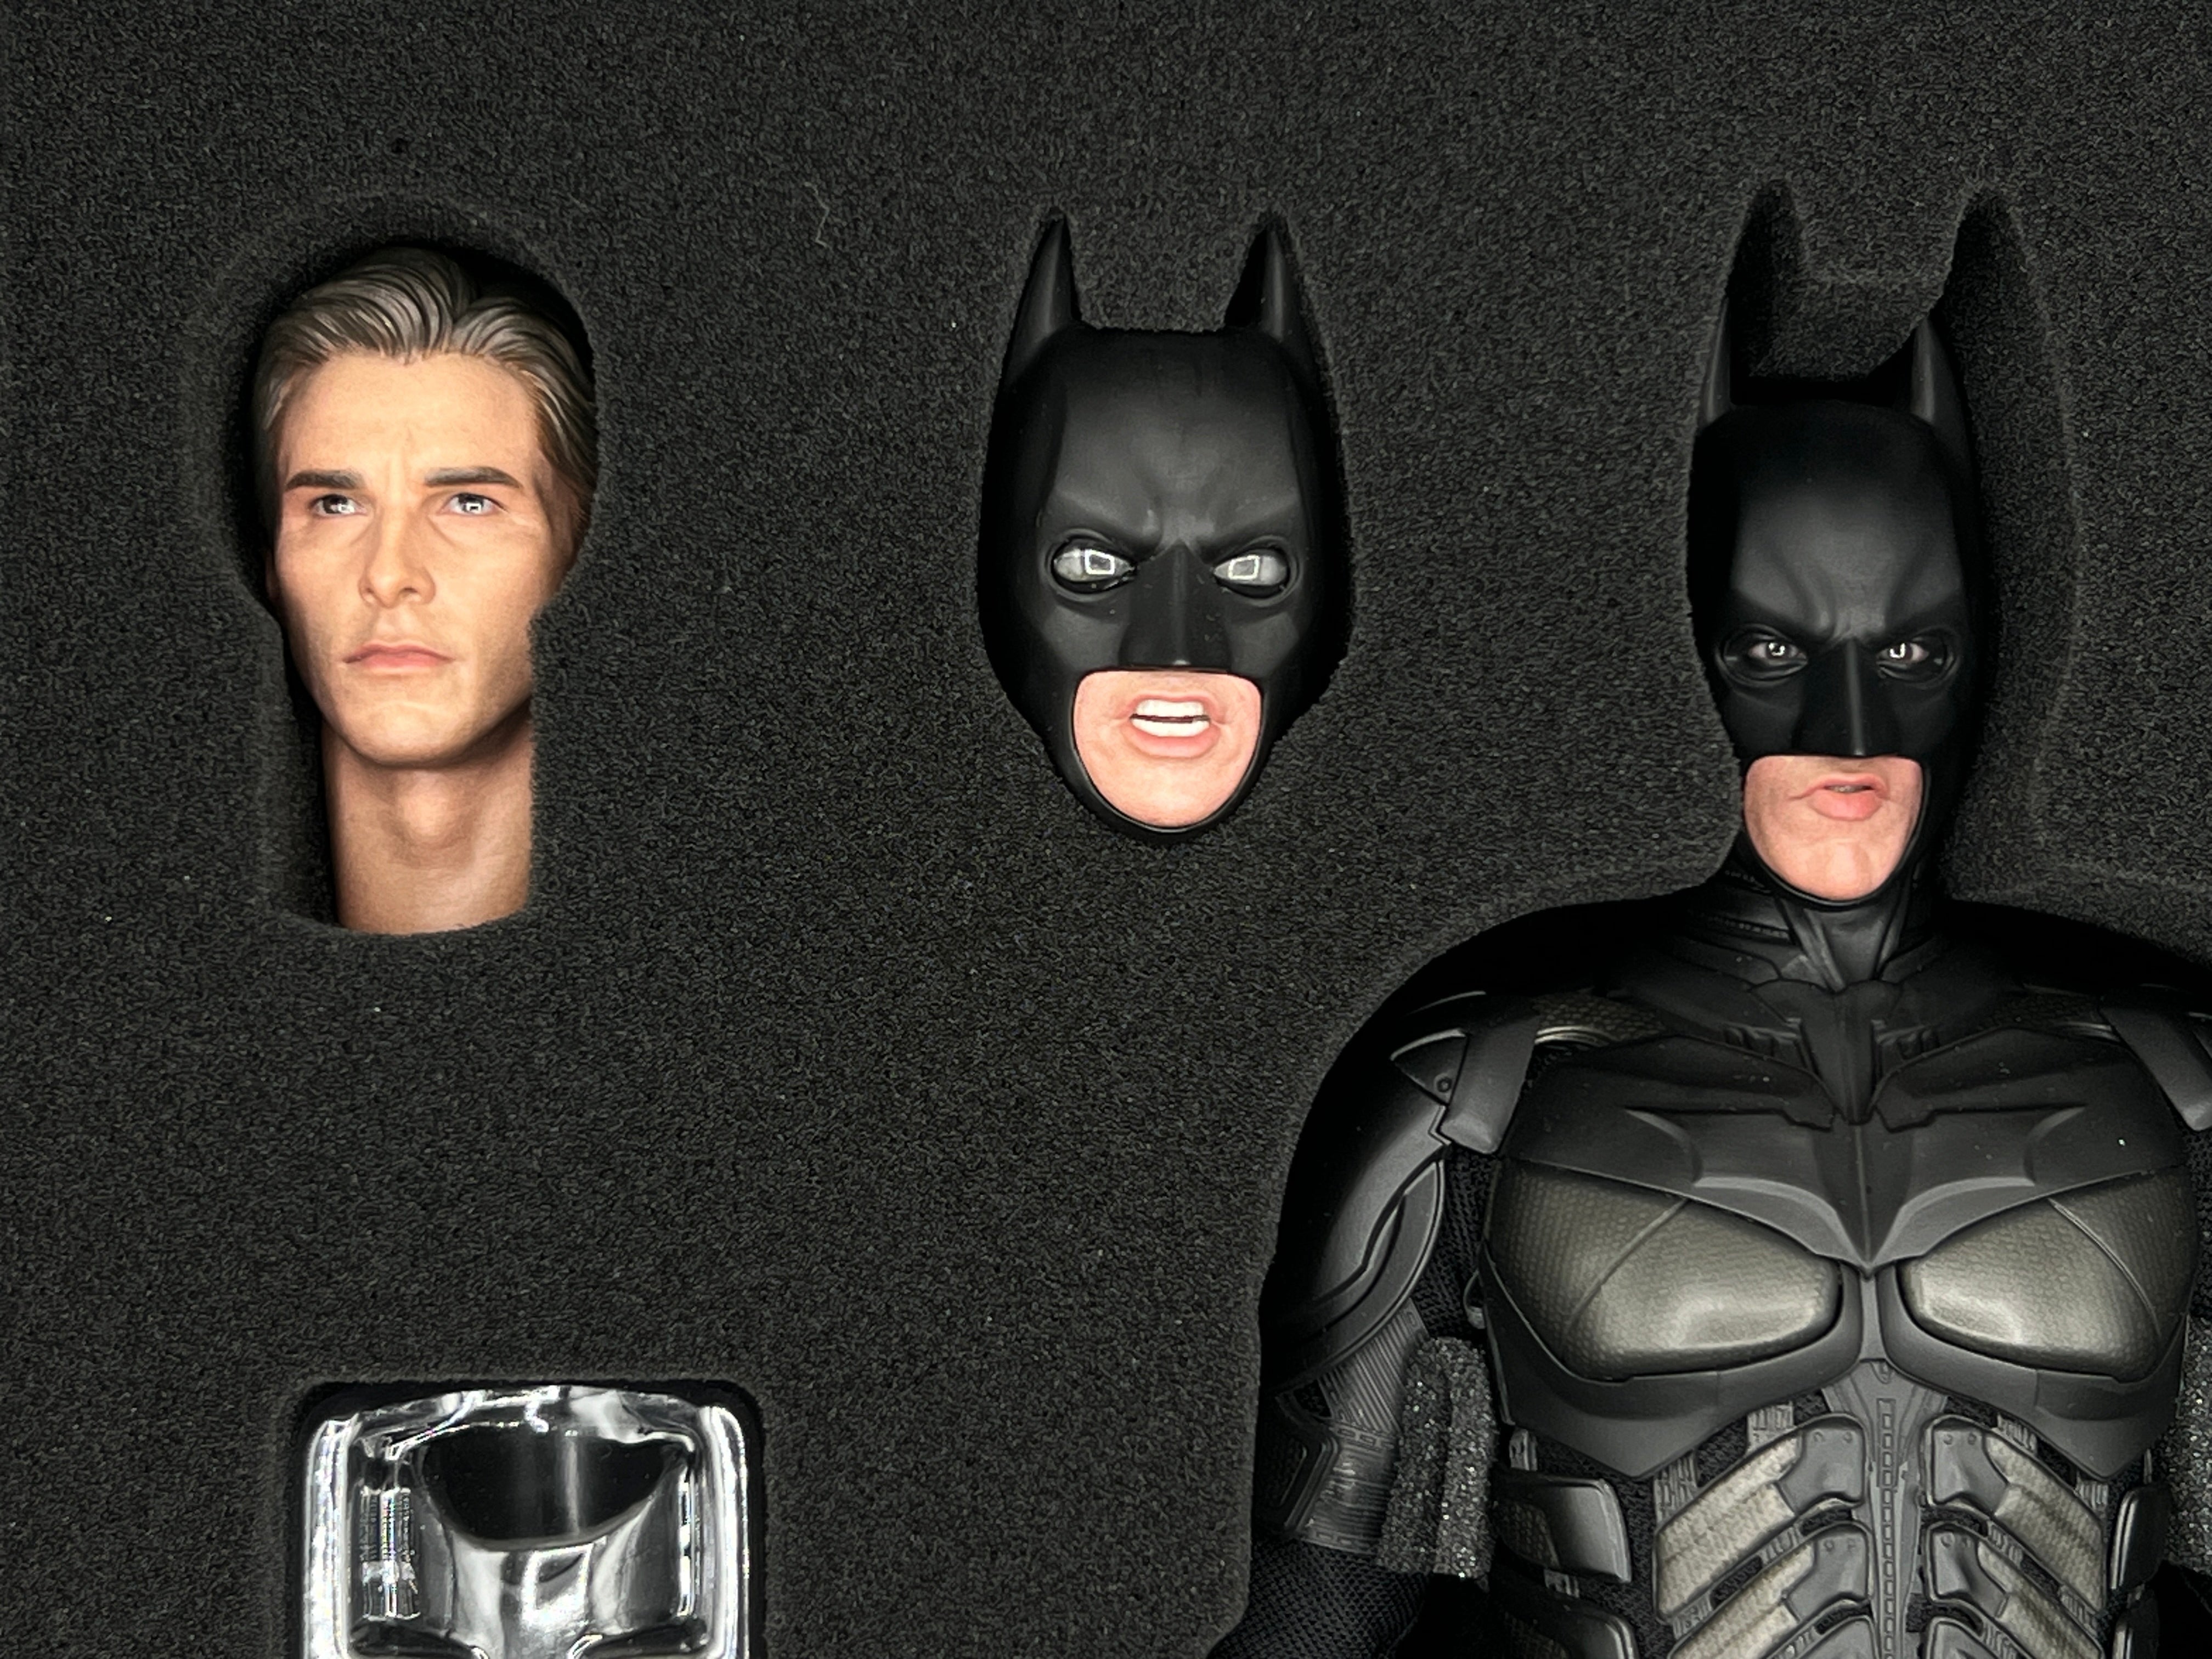 Batman: The Dark Knight Trilogy: DX19: Hot Toys: New With A Small Issue: Read Description! Action Figure Hot Toys